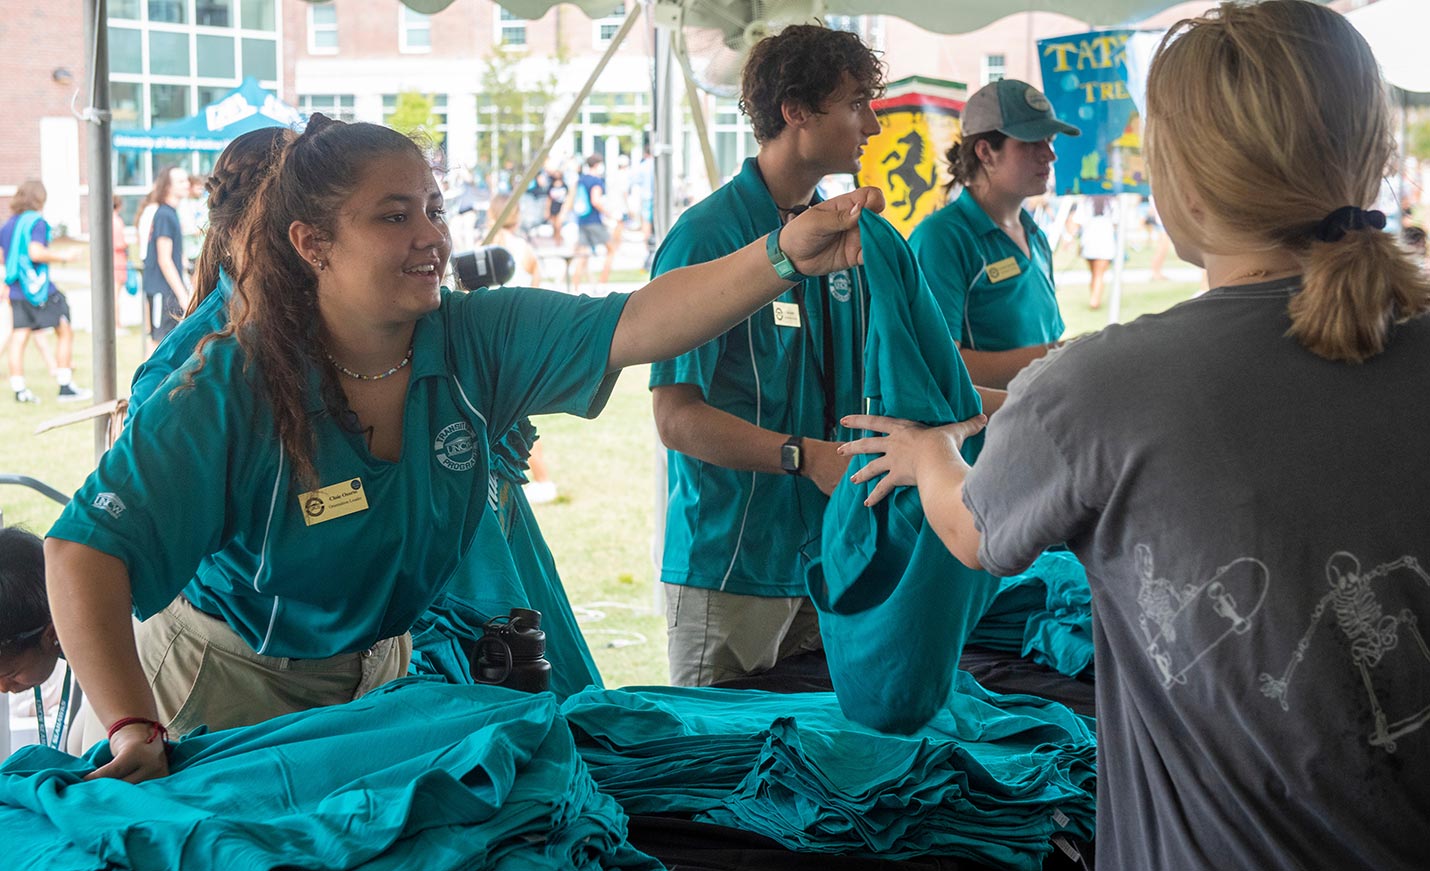 student volunteers pass out free teal shirts to other students